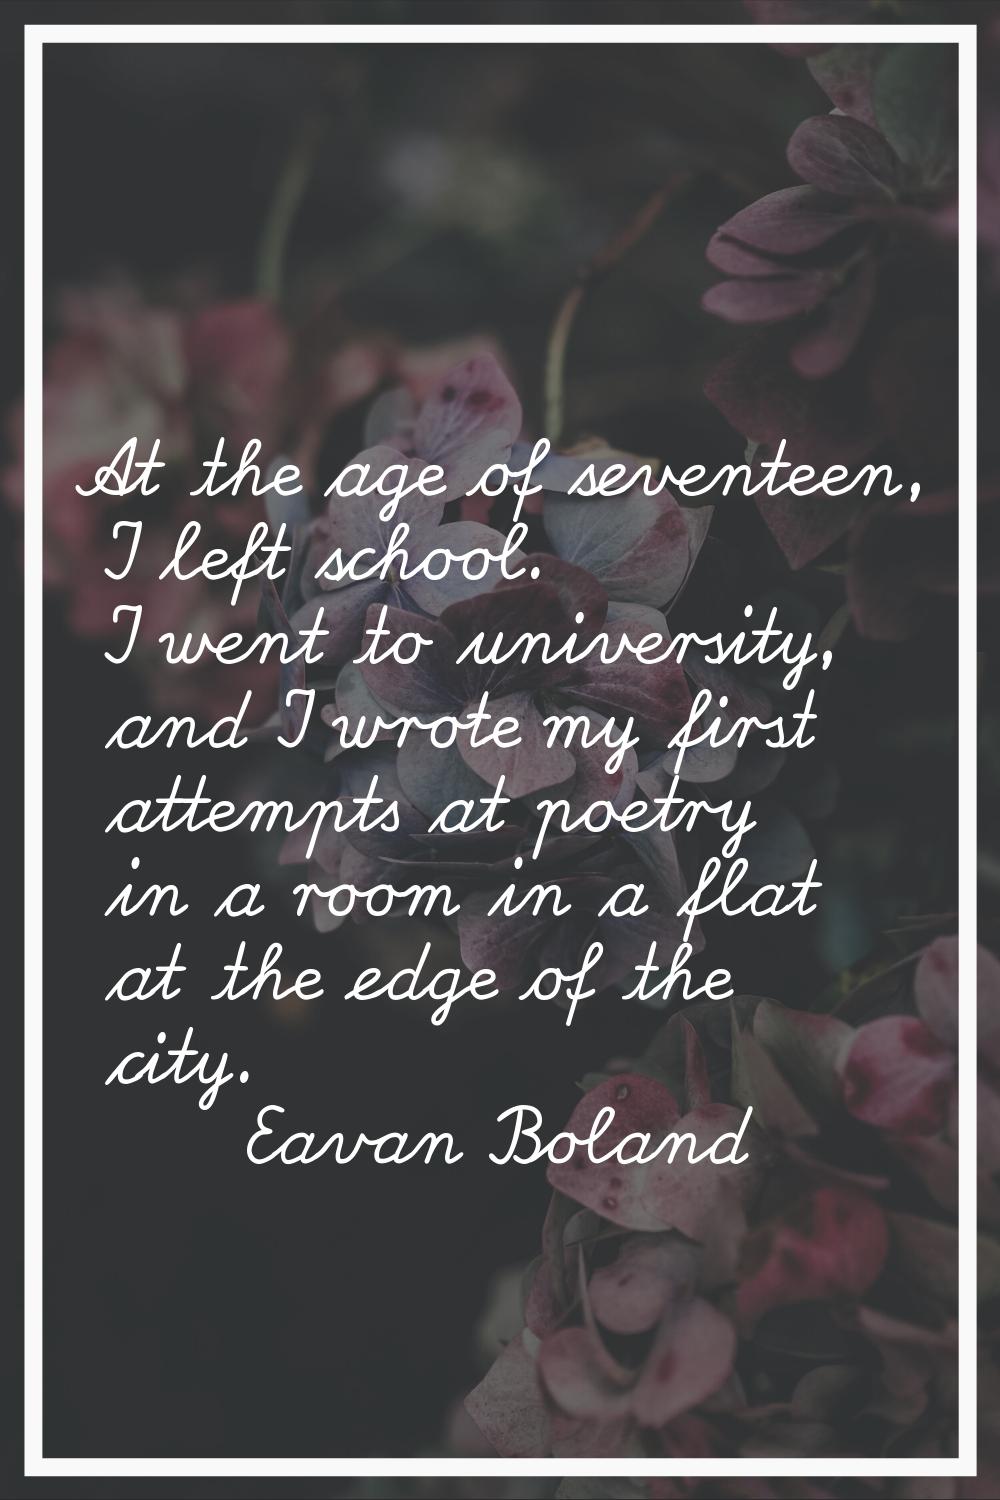 At the age of seventeen, I left school. I went to university, and I wrote my first attempts at poet